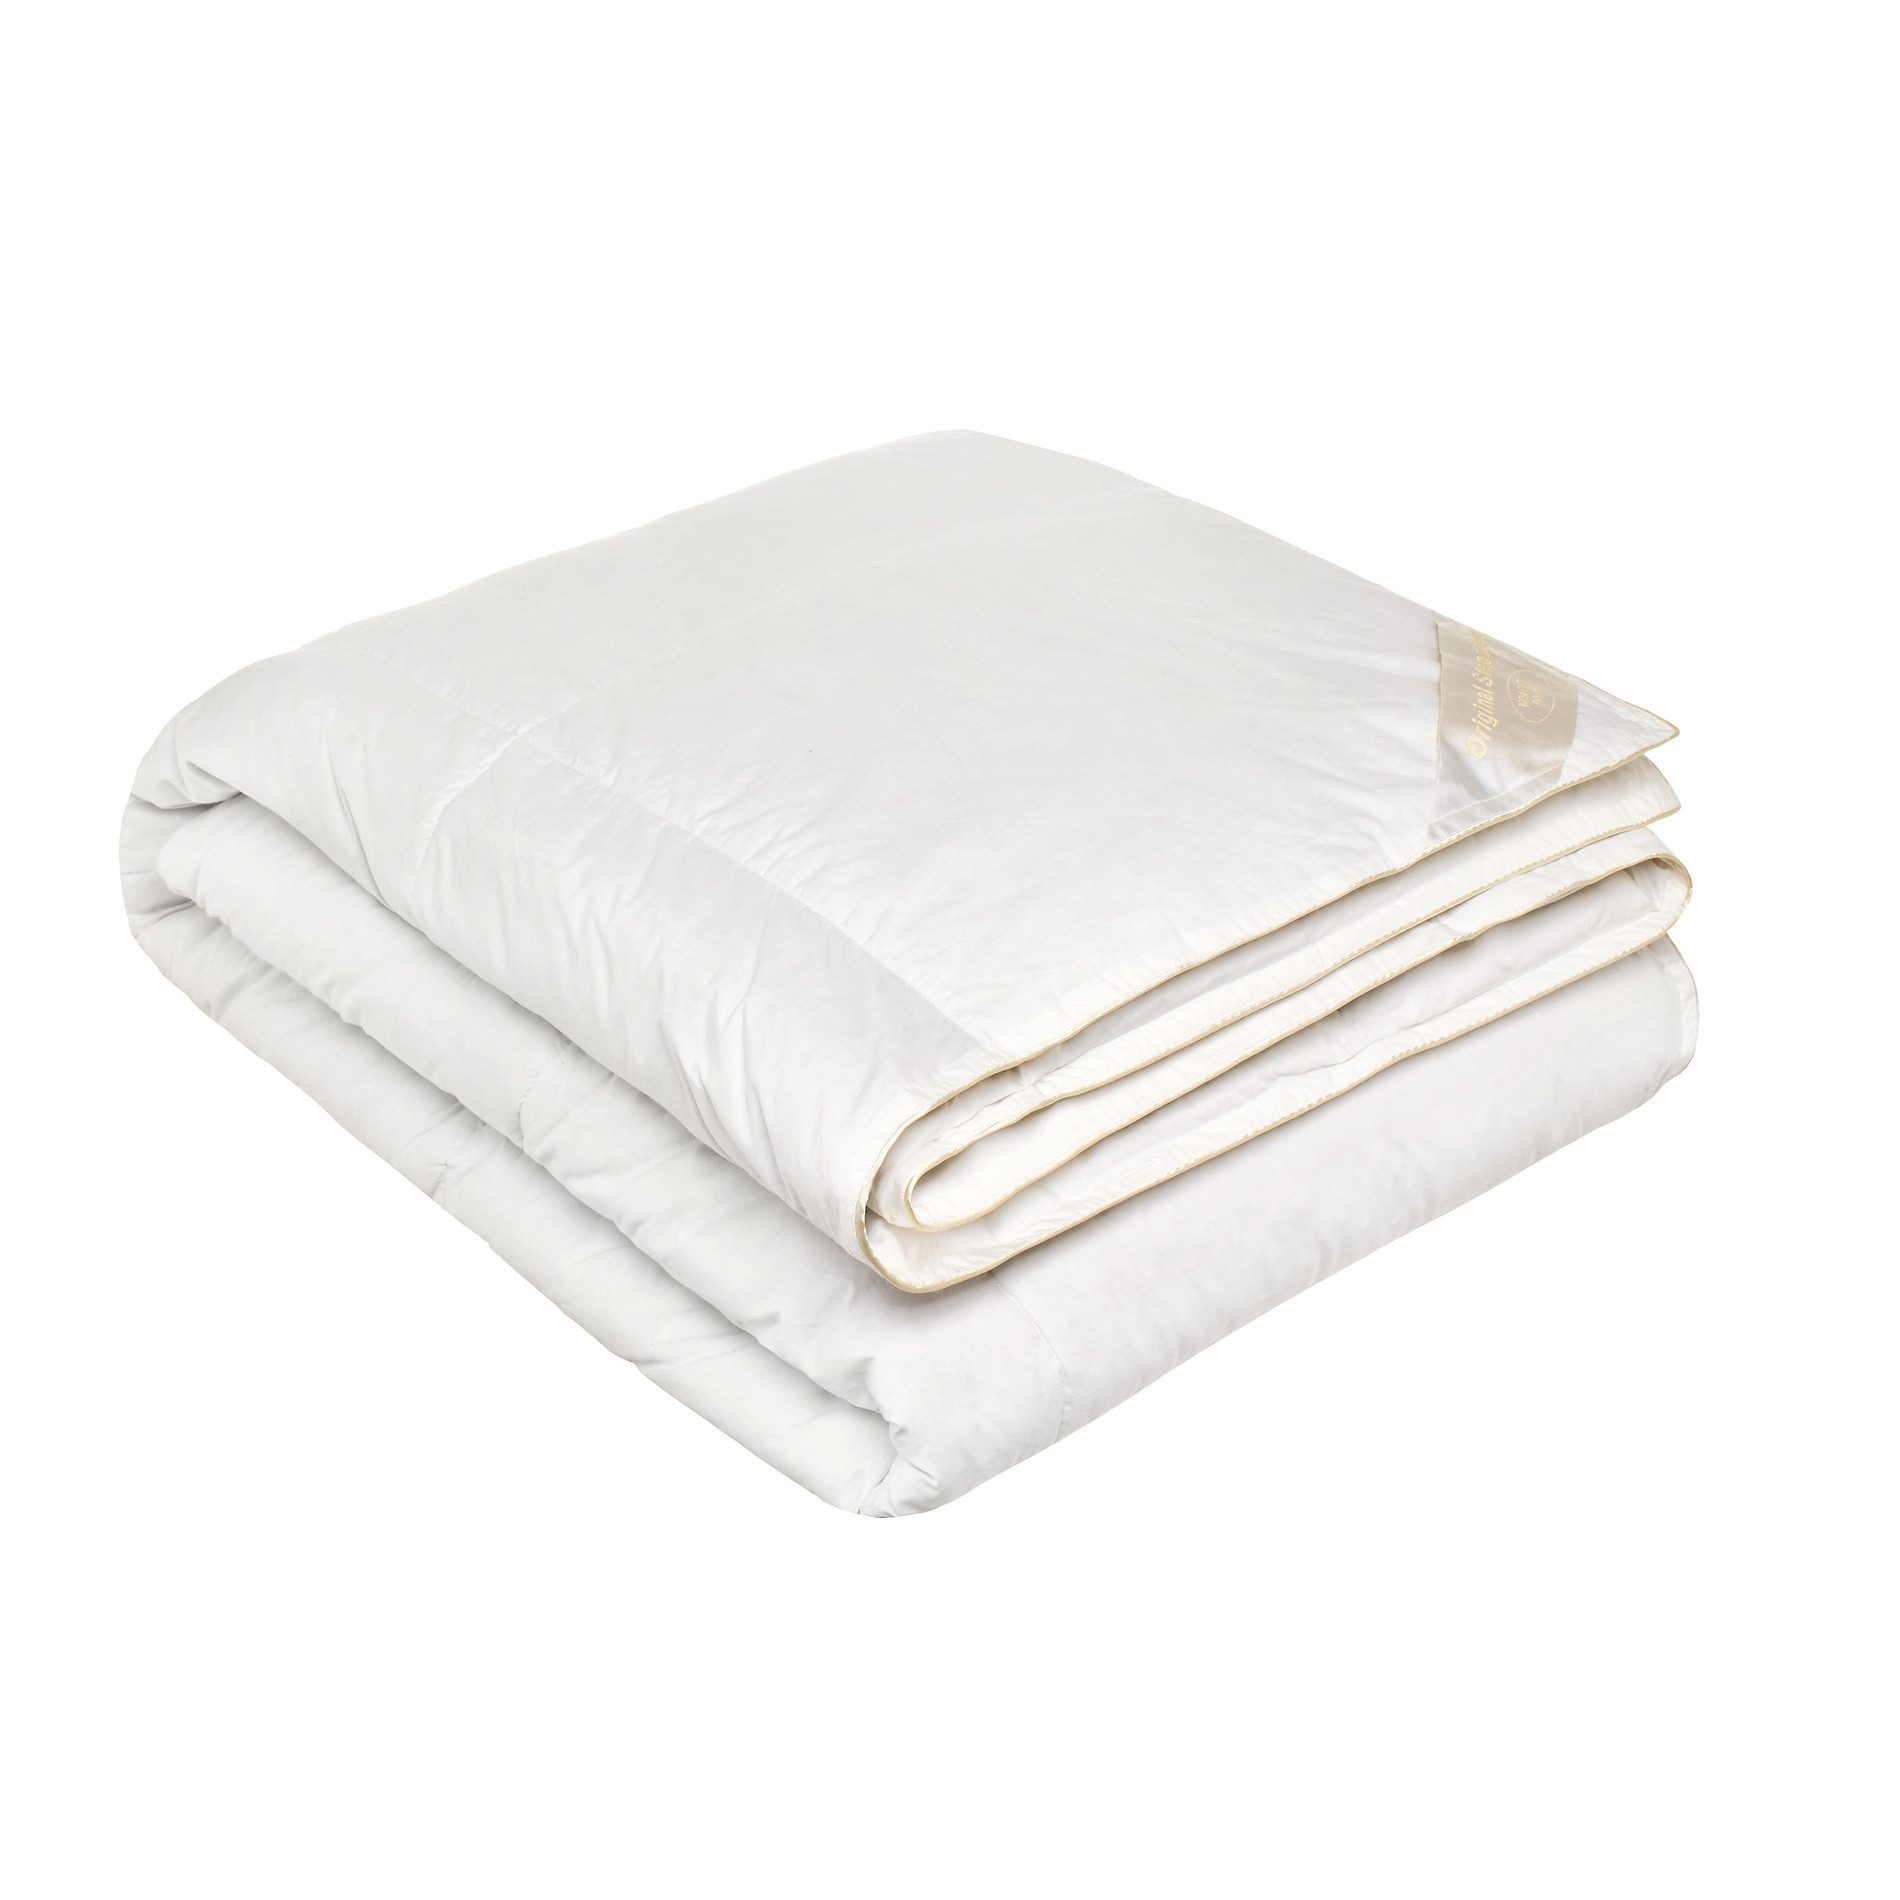 Cotton duvet with natural feather padding, White, large image number 0